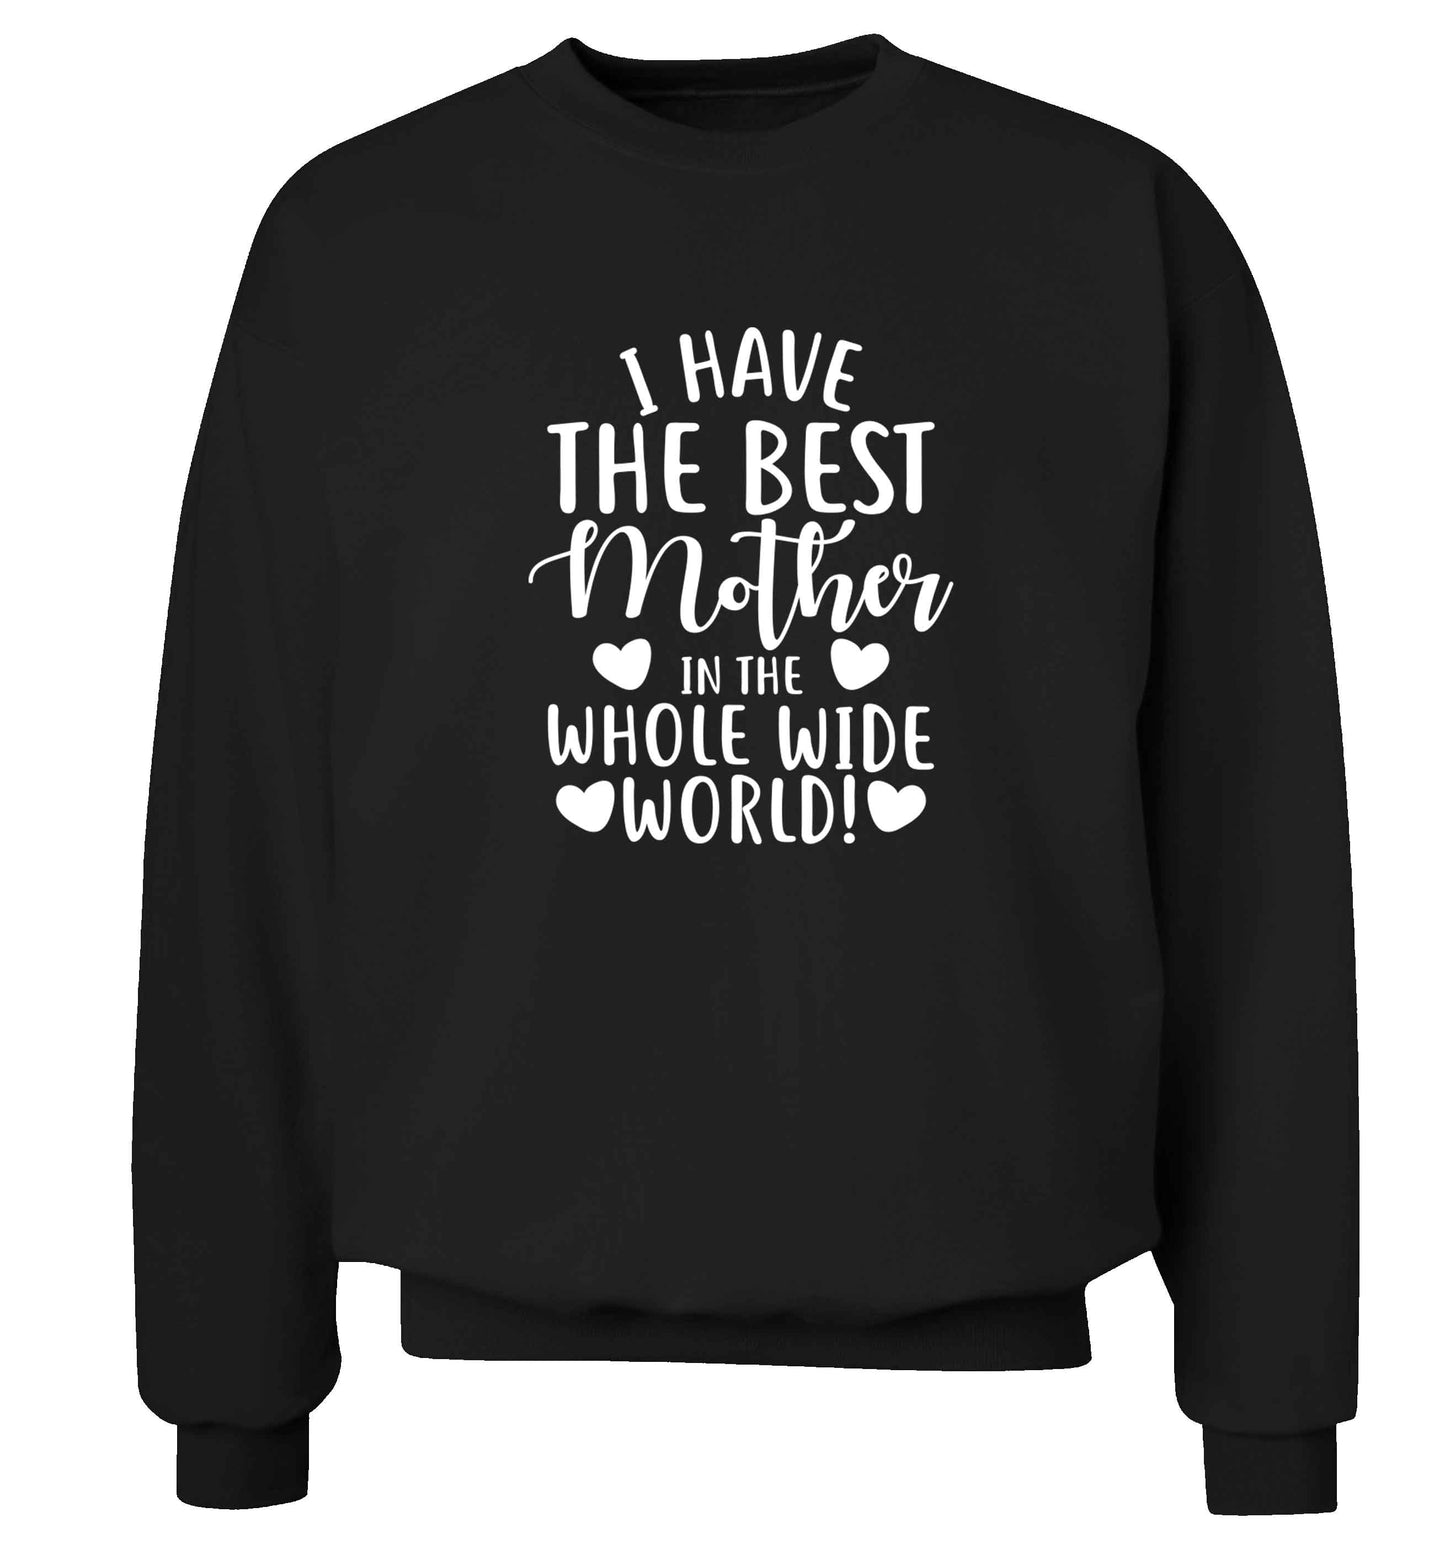 I have the best mother in the whole wide world adult's unisex black sweater 2XL